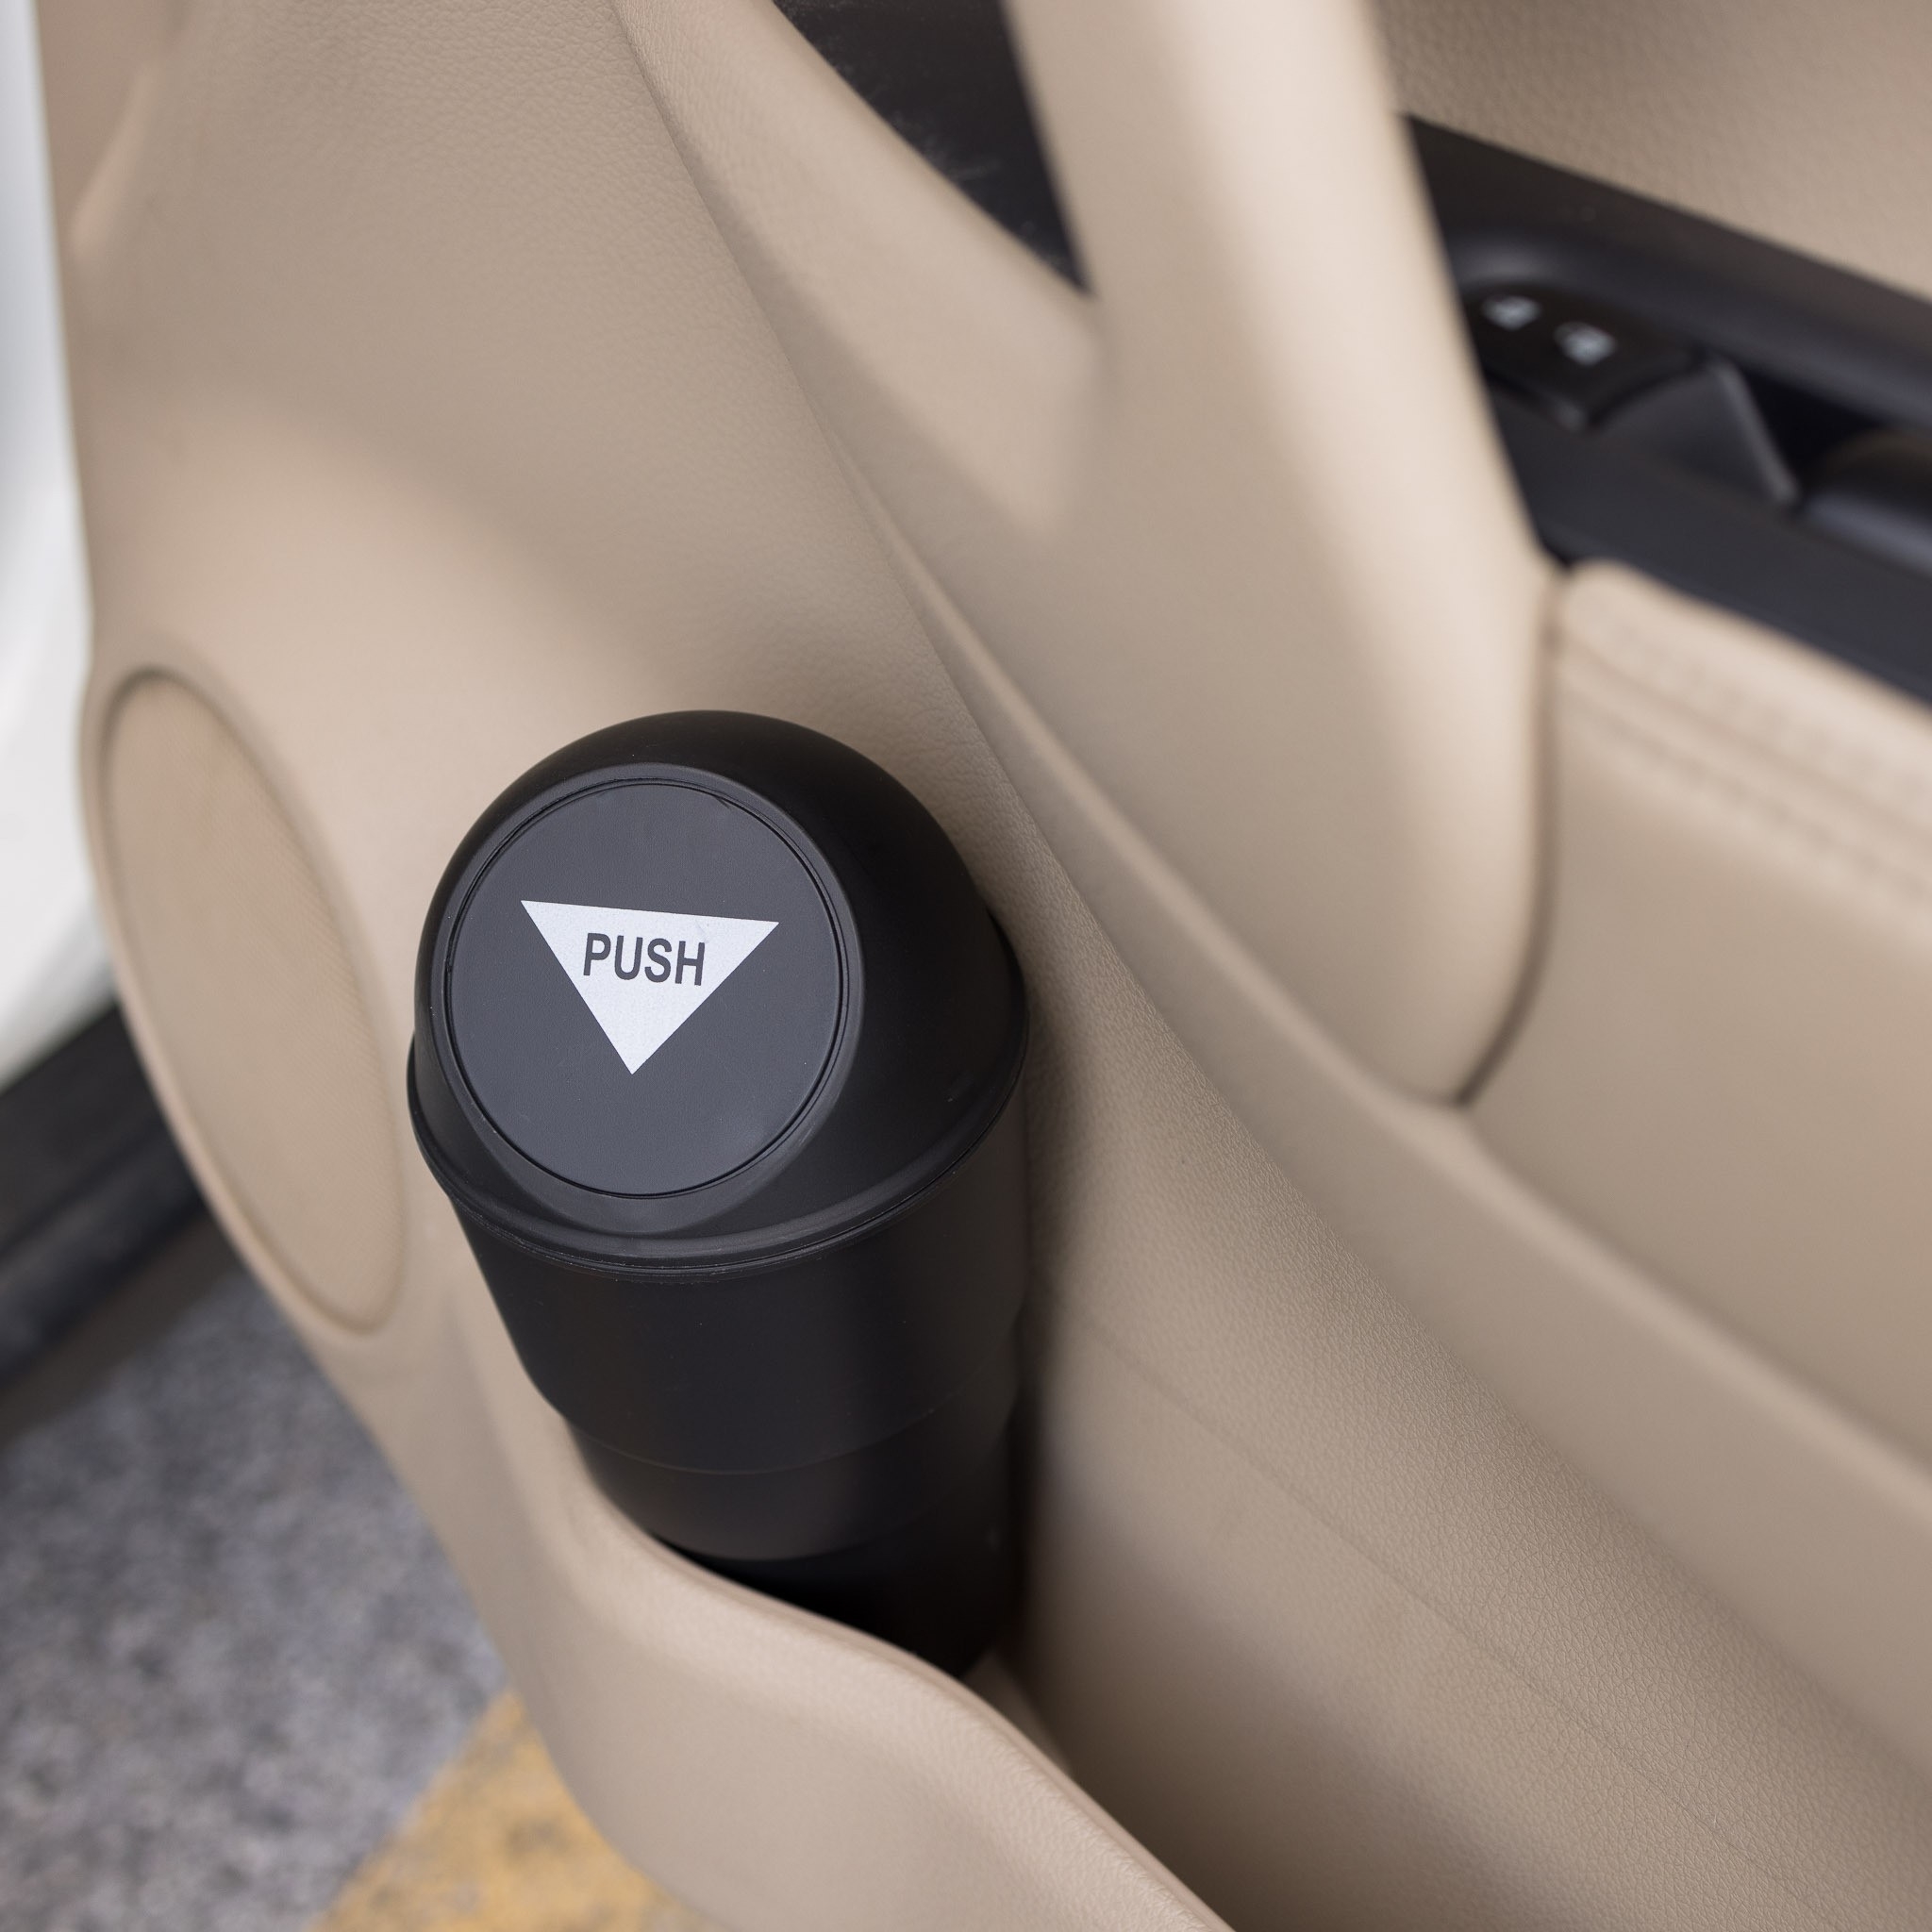 The mini trash can, with a round push lid, in a car&#x27;s side door cup holder